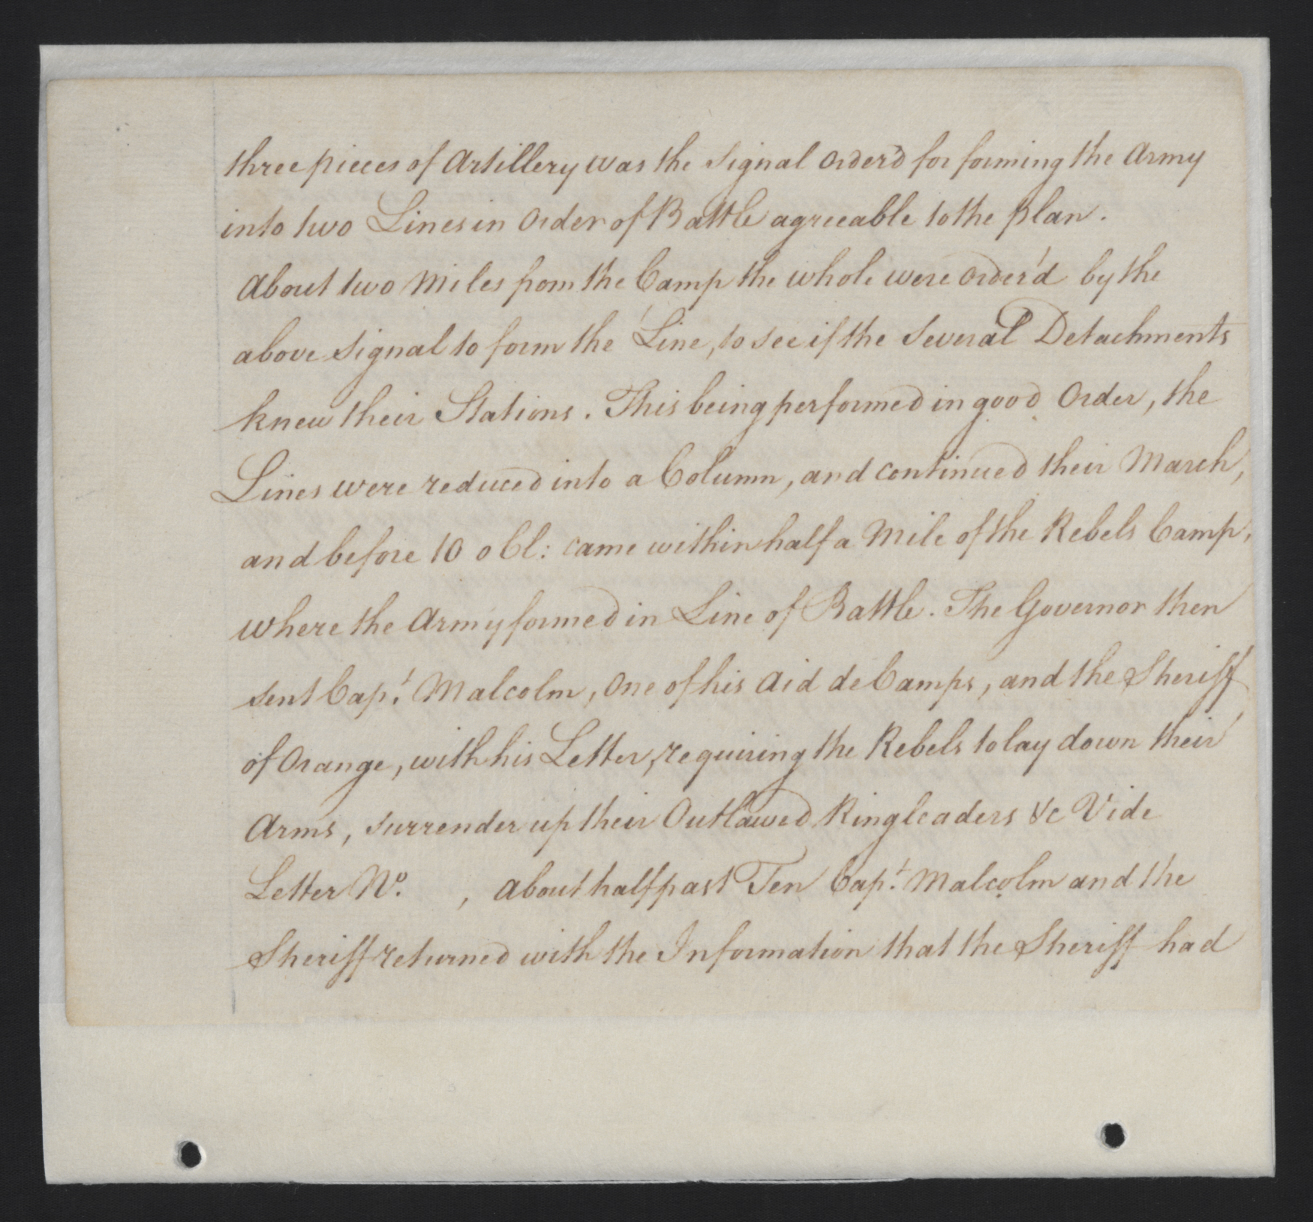 Journal Entry from William Tryon on the Expedition Against the Regulators, 16 May 1771, page 2.